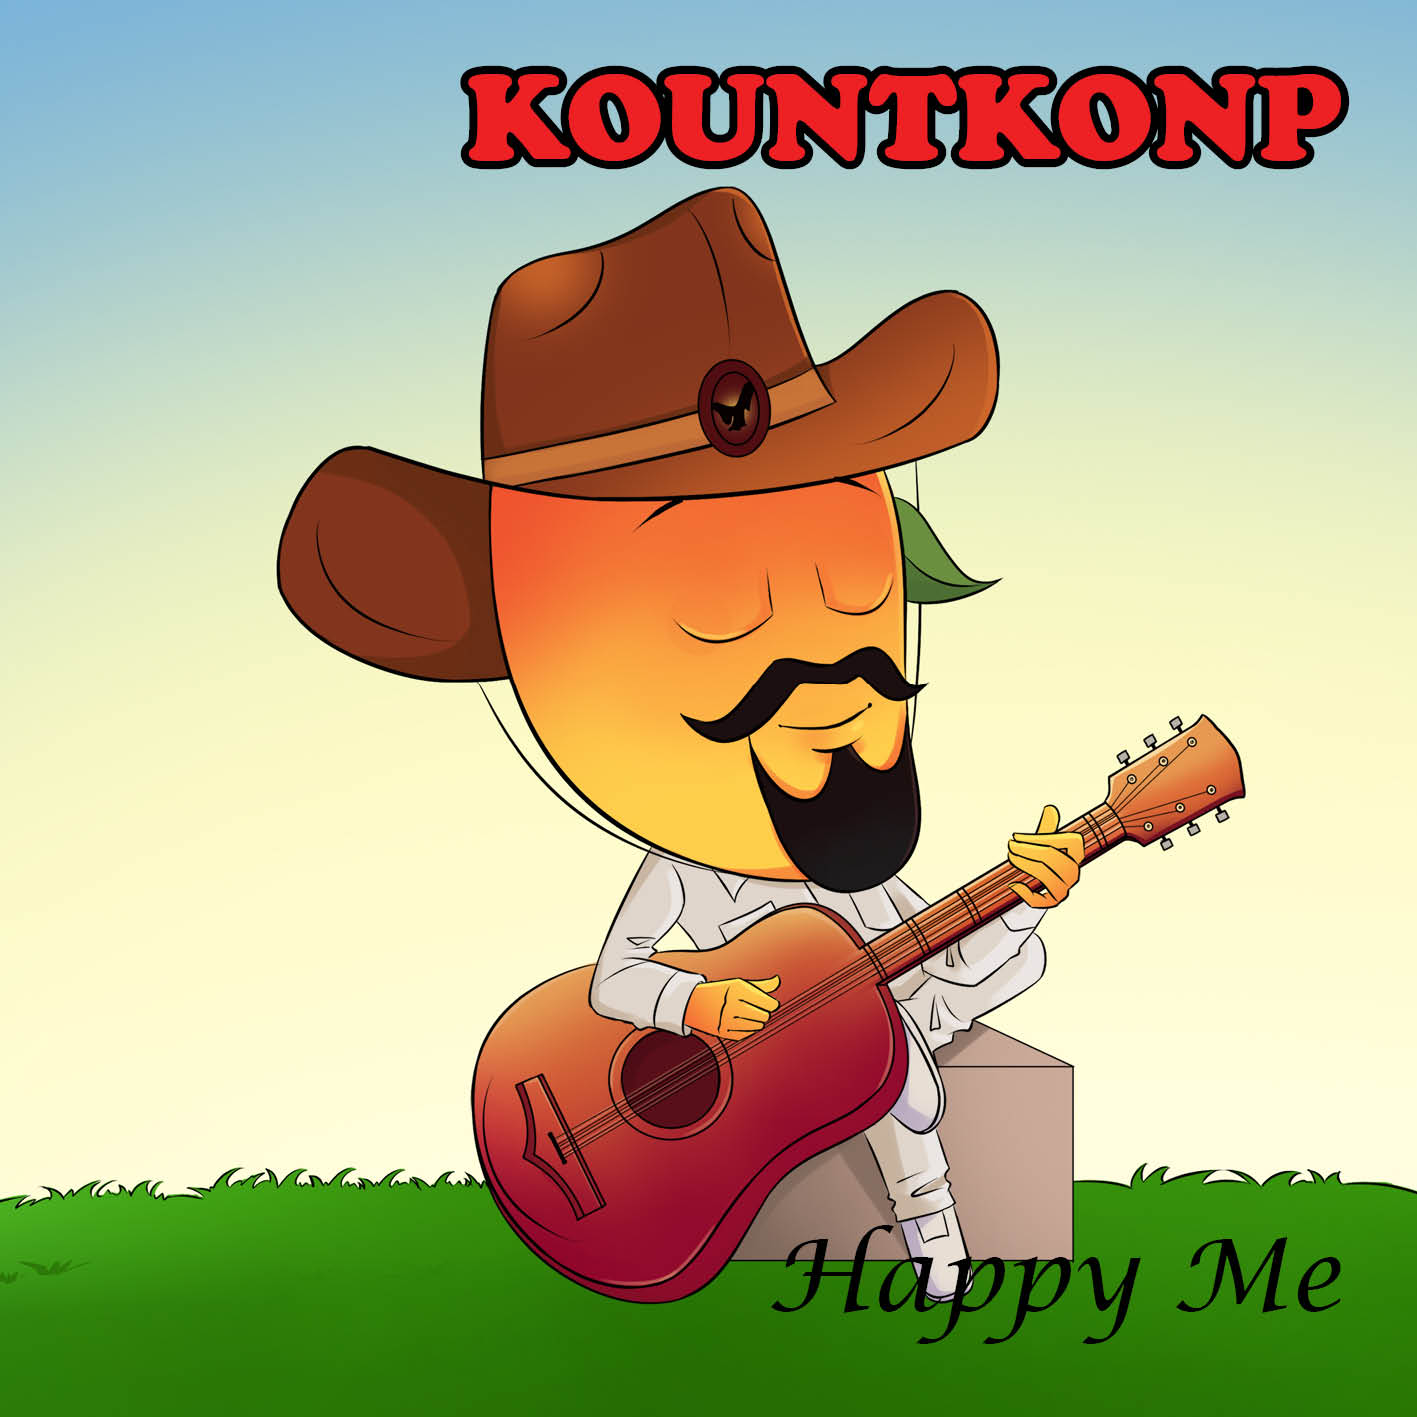 Fineness World Inc. Announces the Release of "Happy Me," the First Single of Kountkonp